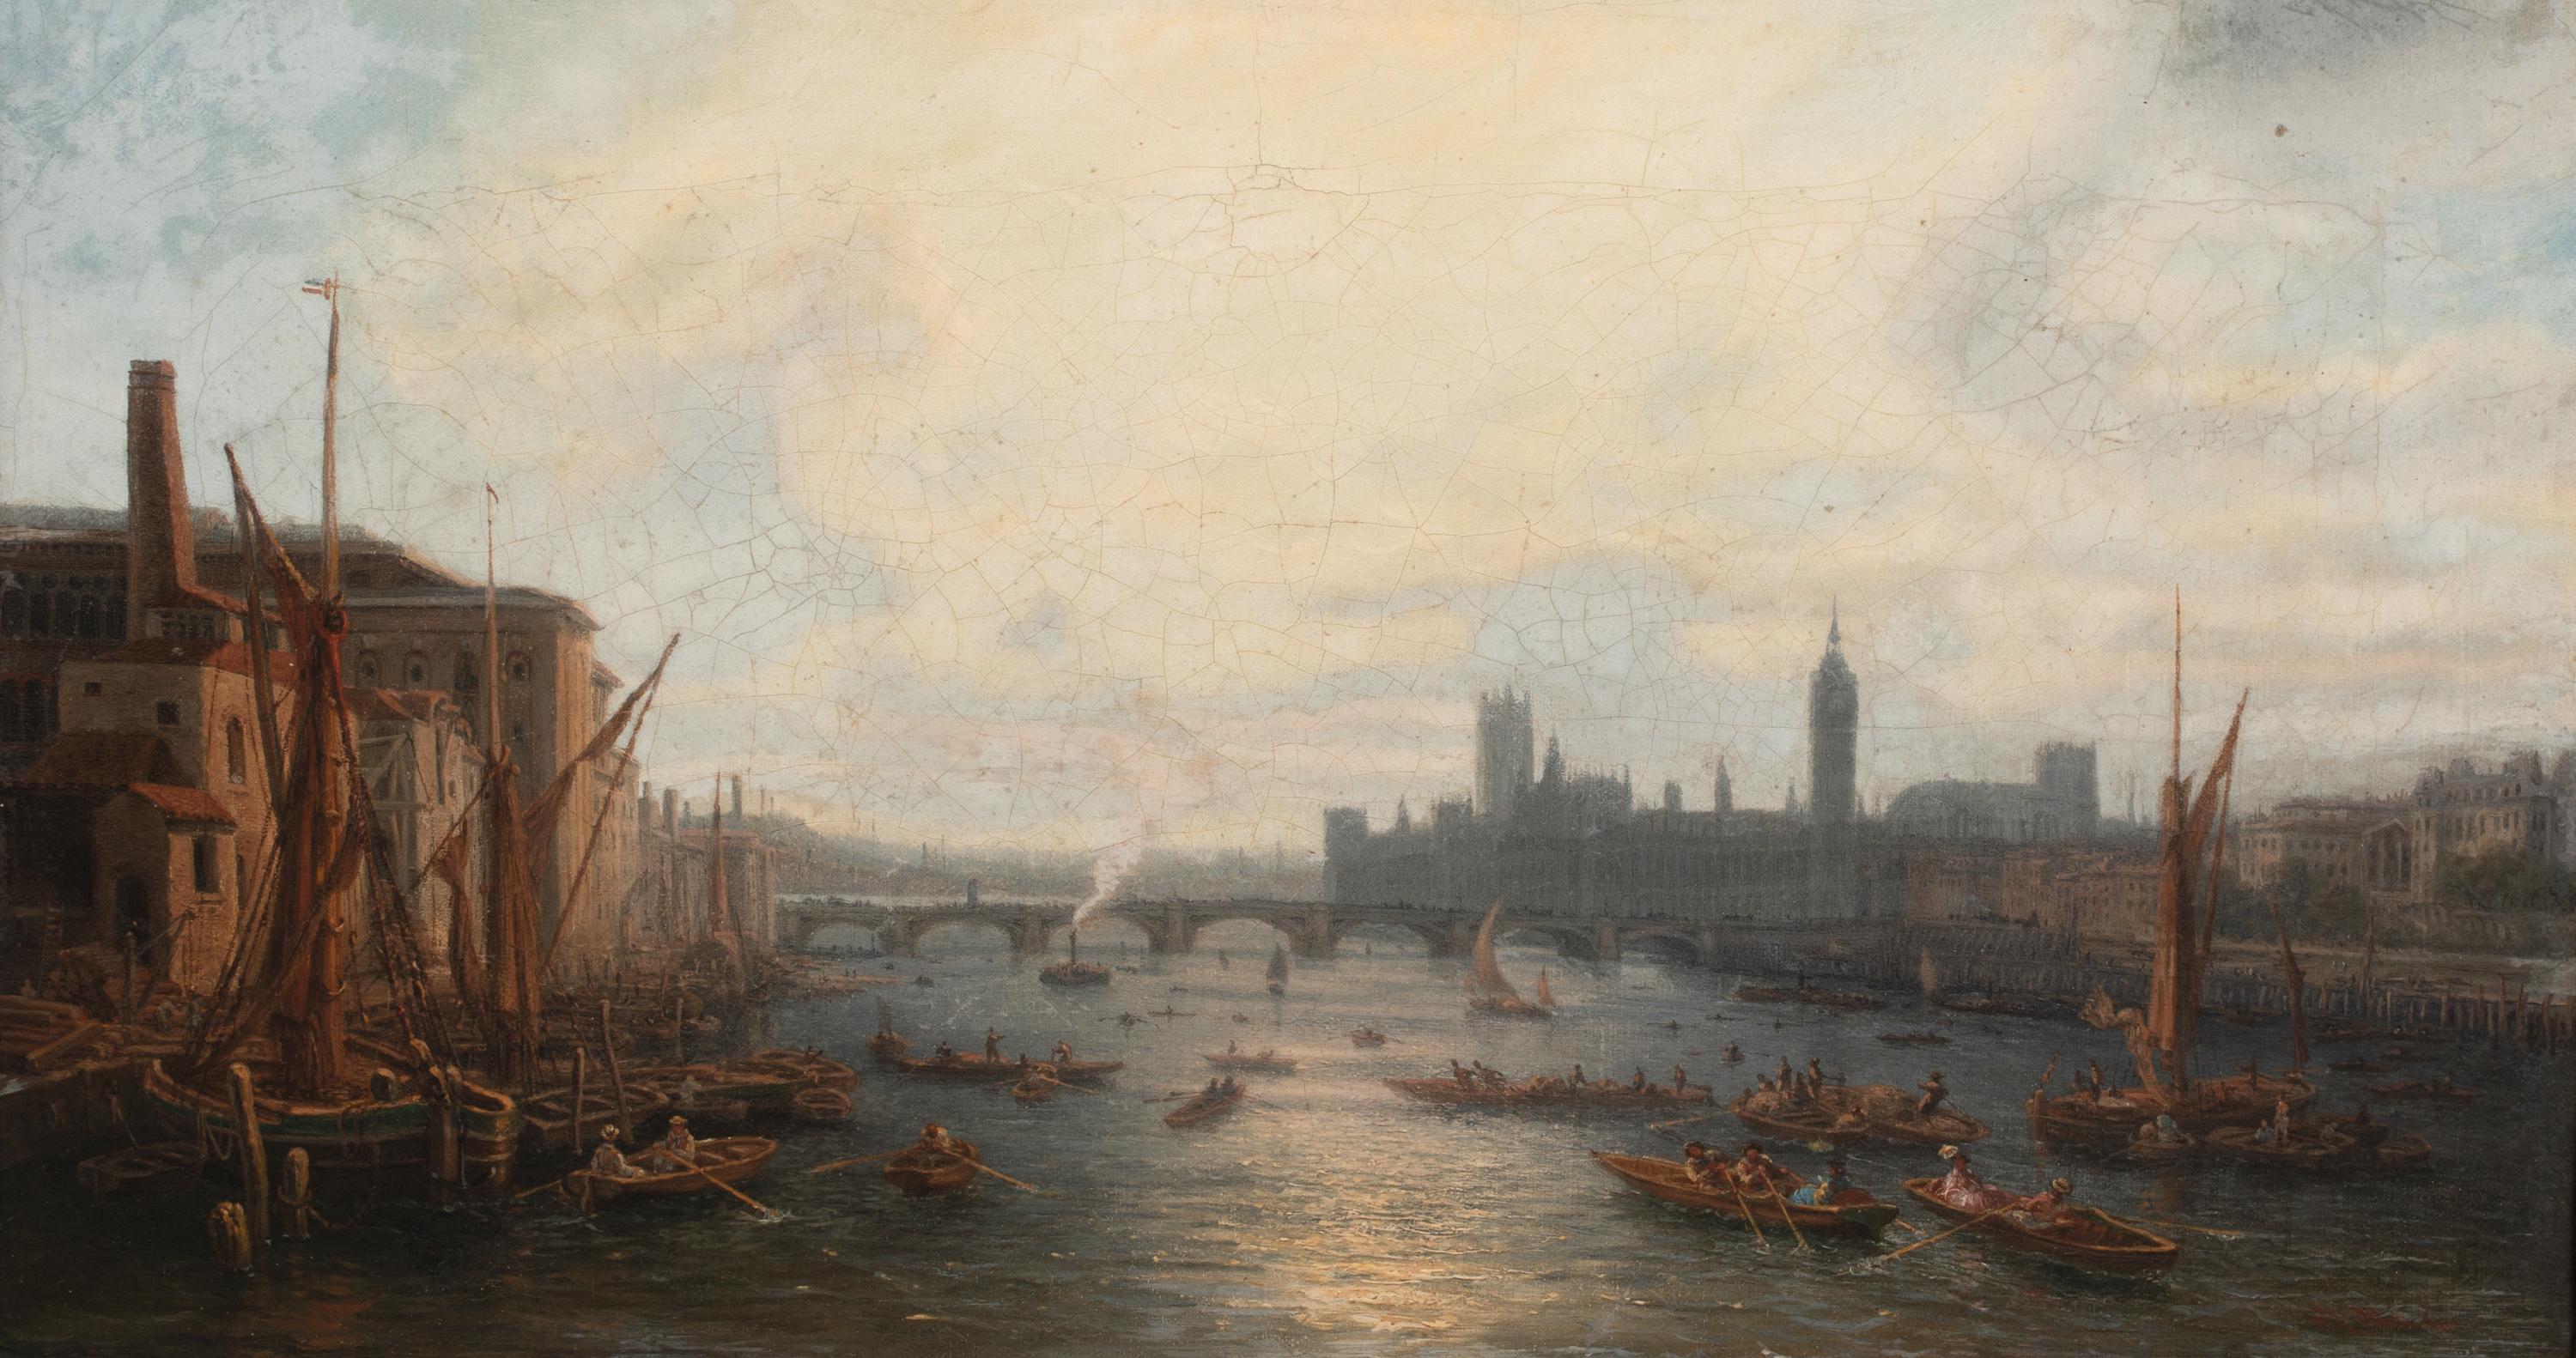 View Of Westminster From The Thames, 19th Century

Signed indistinctly

Large 19th century English School extensive view of London, looking toward Westminster from the Thames, oil on canvas. Excellent quality and condition view at sunset with busy